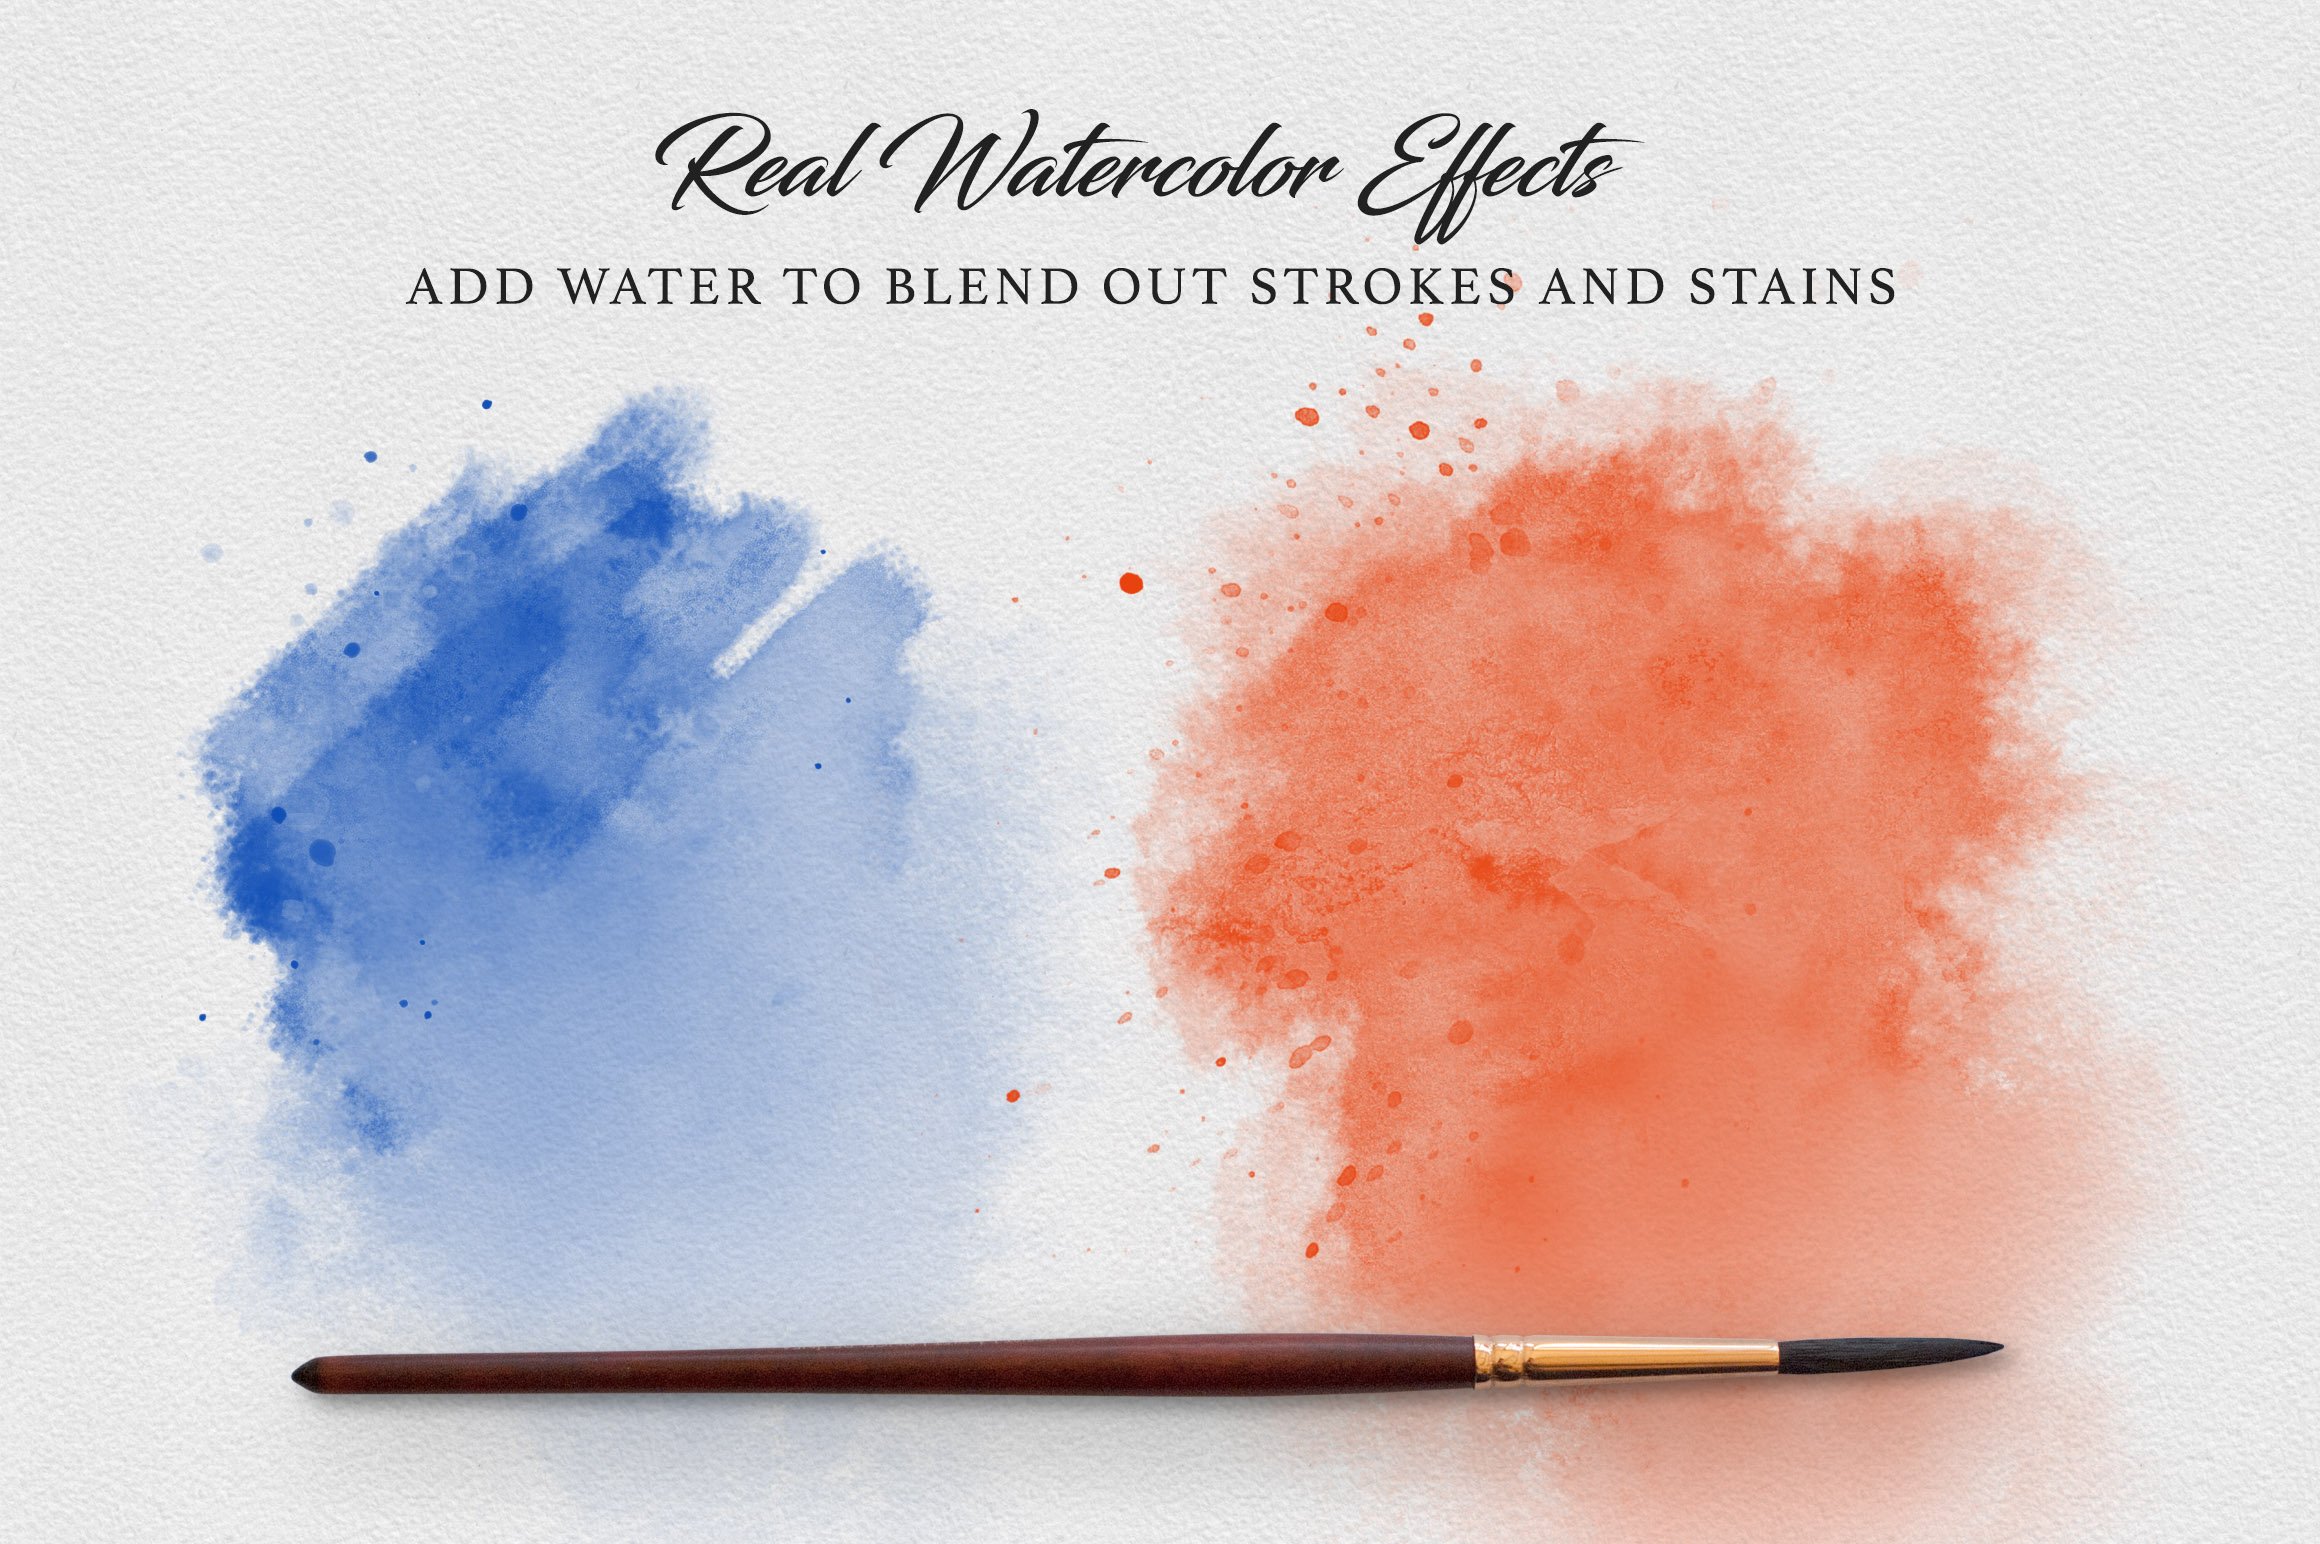 Master Watercolor Affinity Brushes